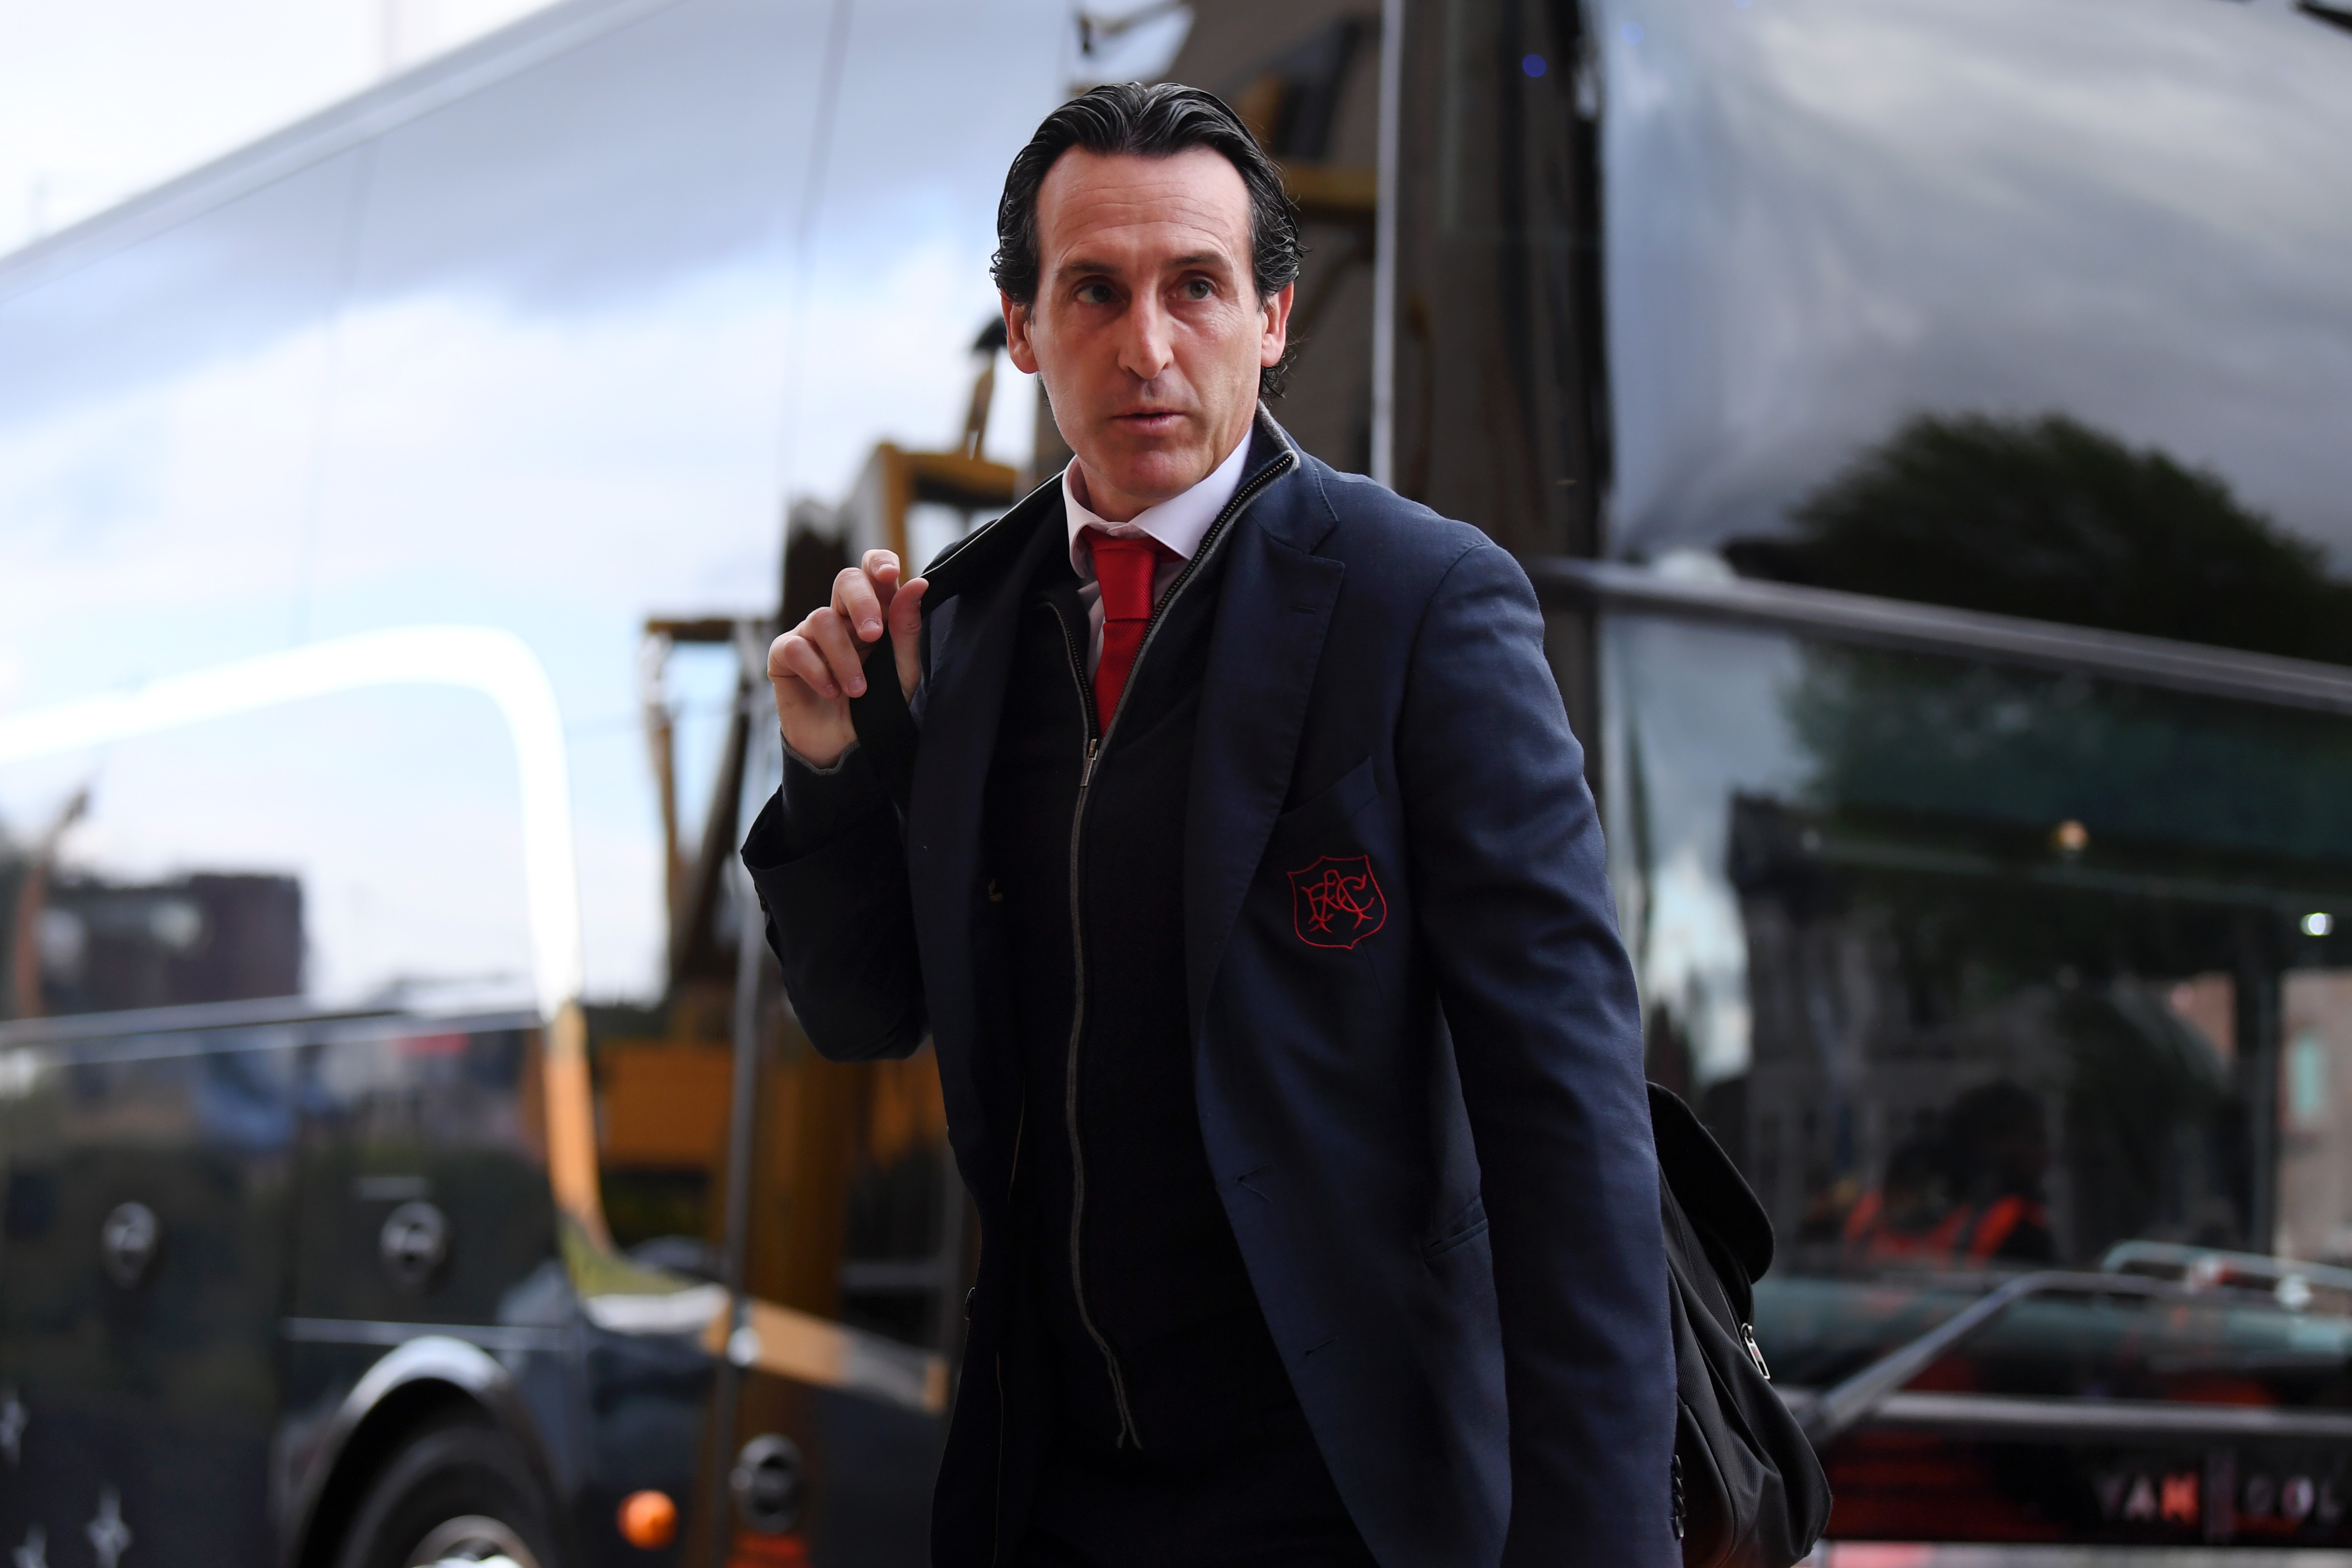 Emery's brand of football at Arsenal deserves a Champions League place.(Photo courtesy: AFP/Getty)